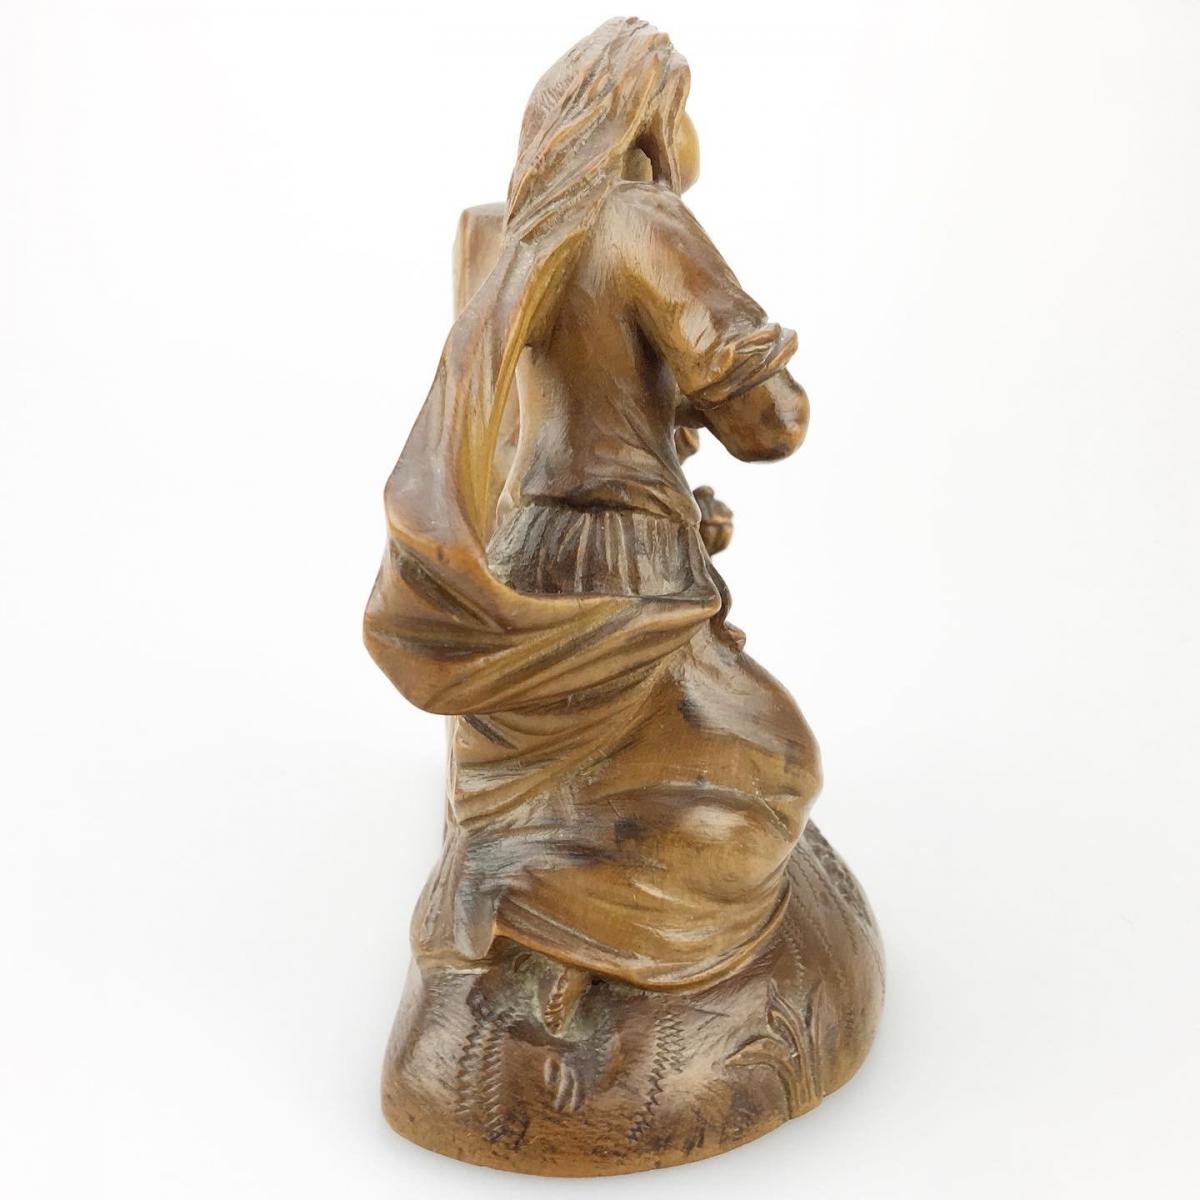 Penitent Mary Magdeline. Southern Germany, mid 17th century